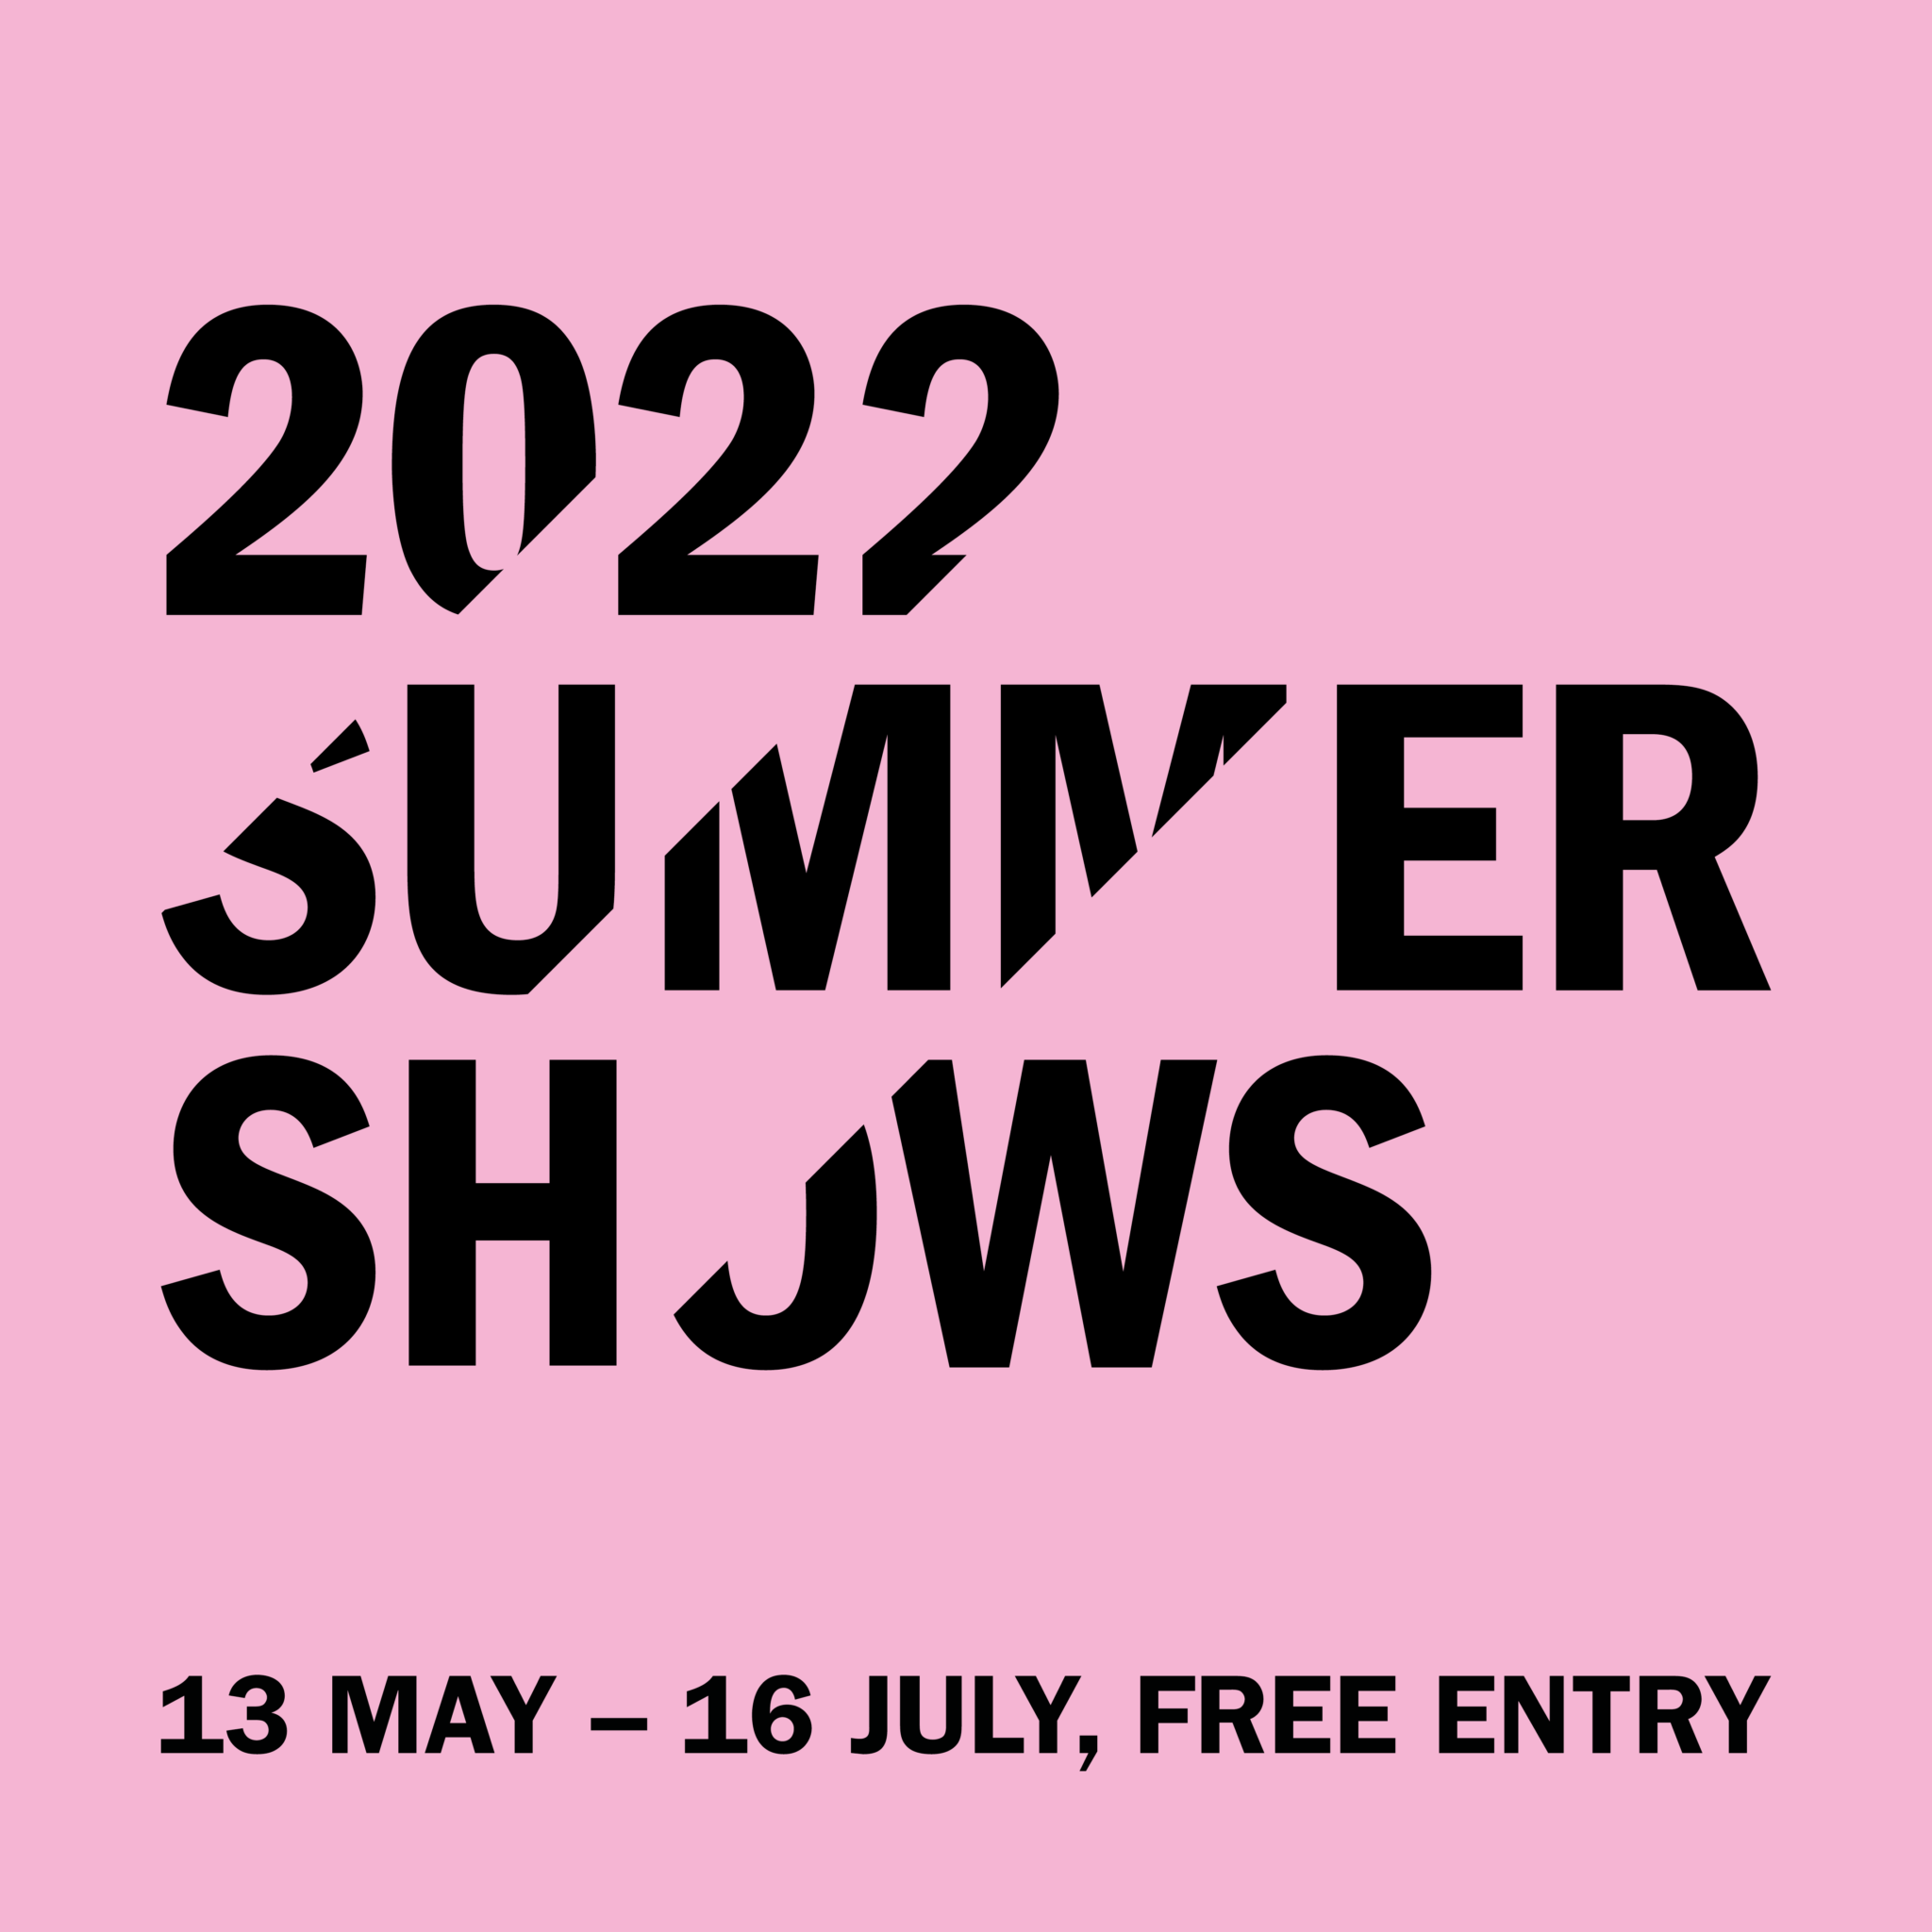 Black text on a light pink background reads: 2022 Summer Shows 13 May - 16 July, free entry